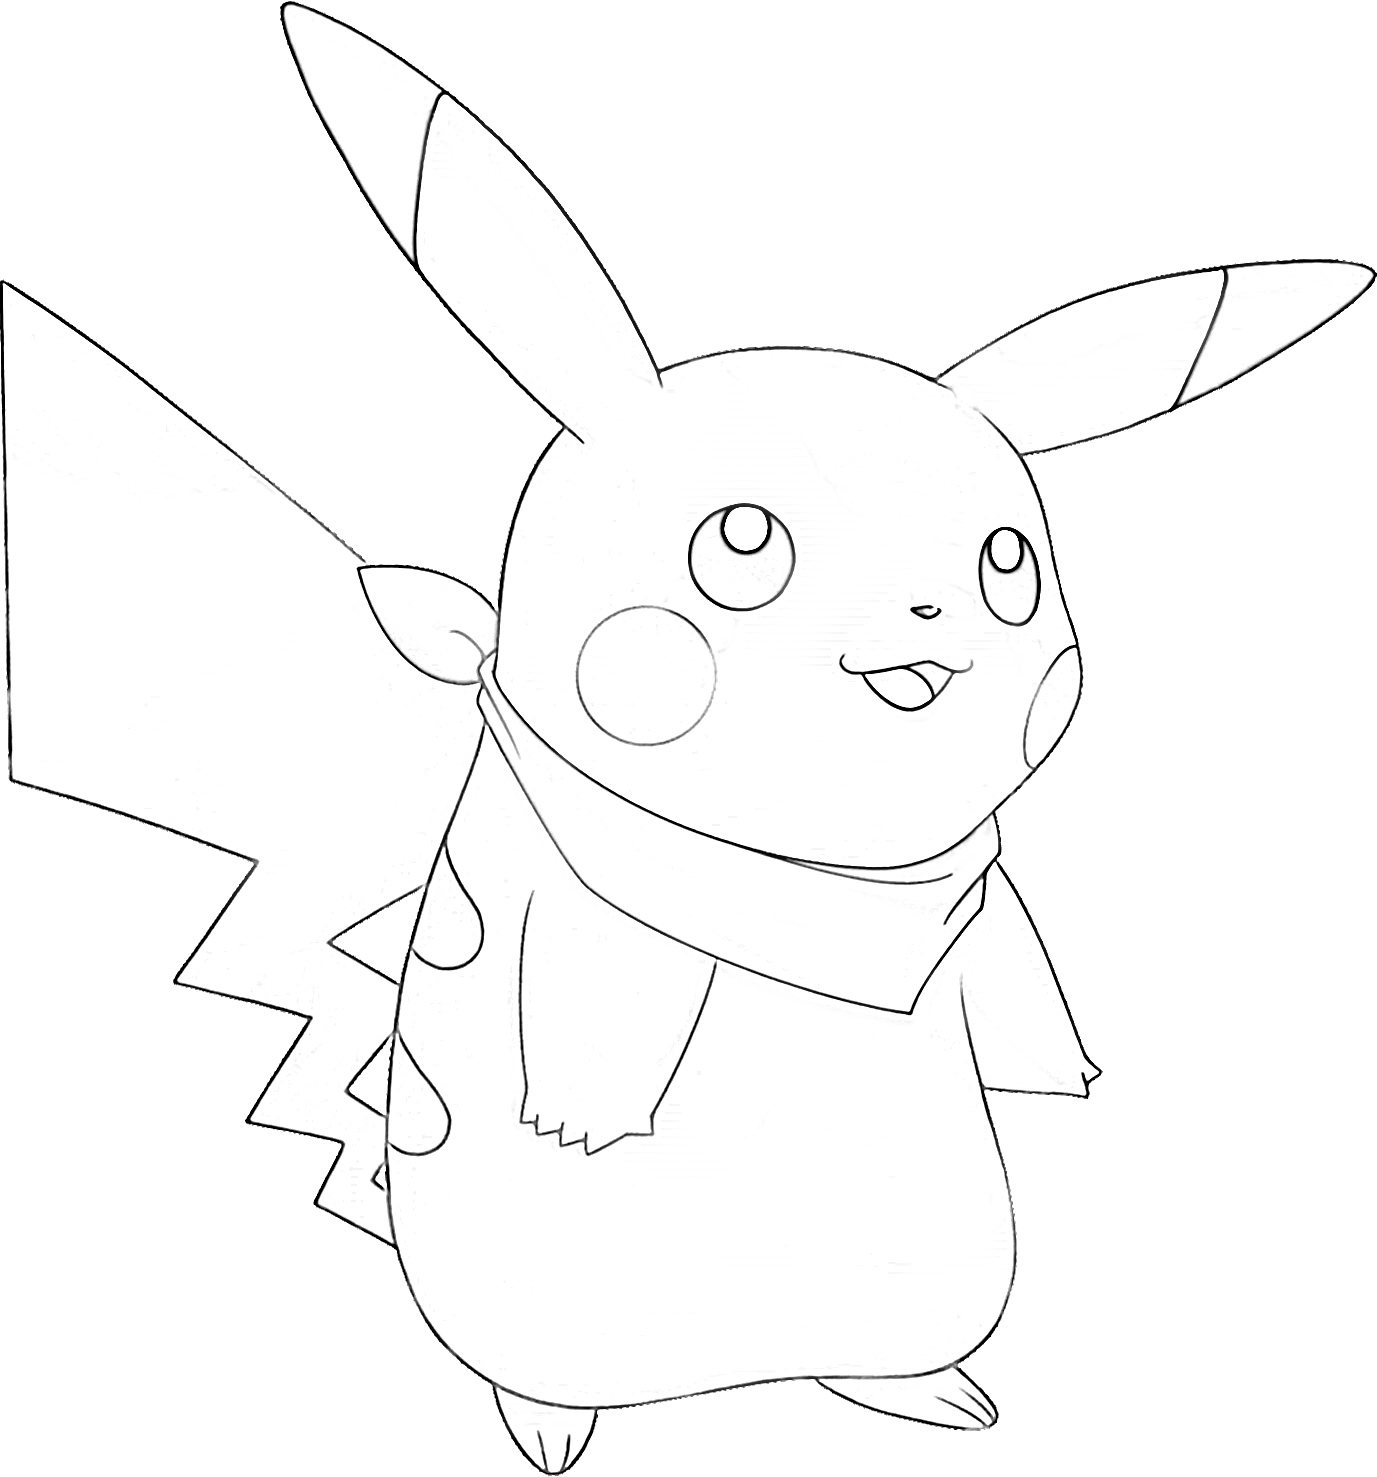 10 Free Pikachu Coloring Pages for Kids